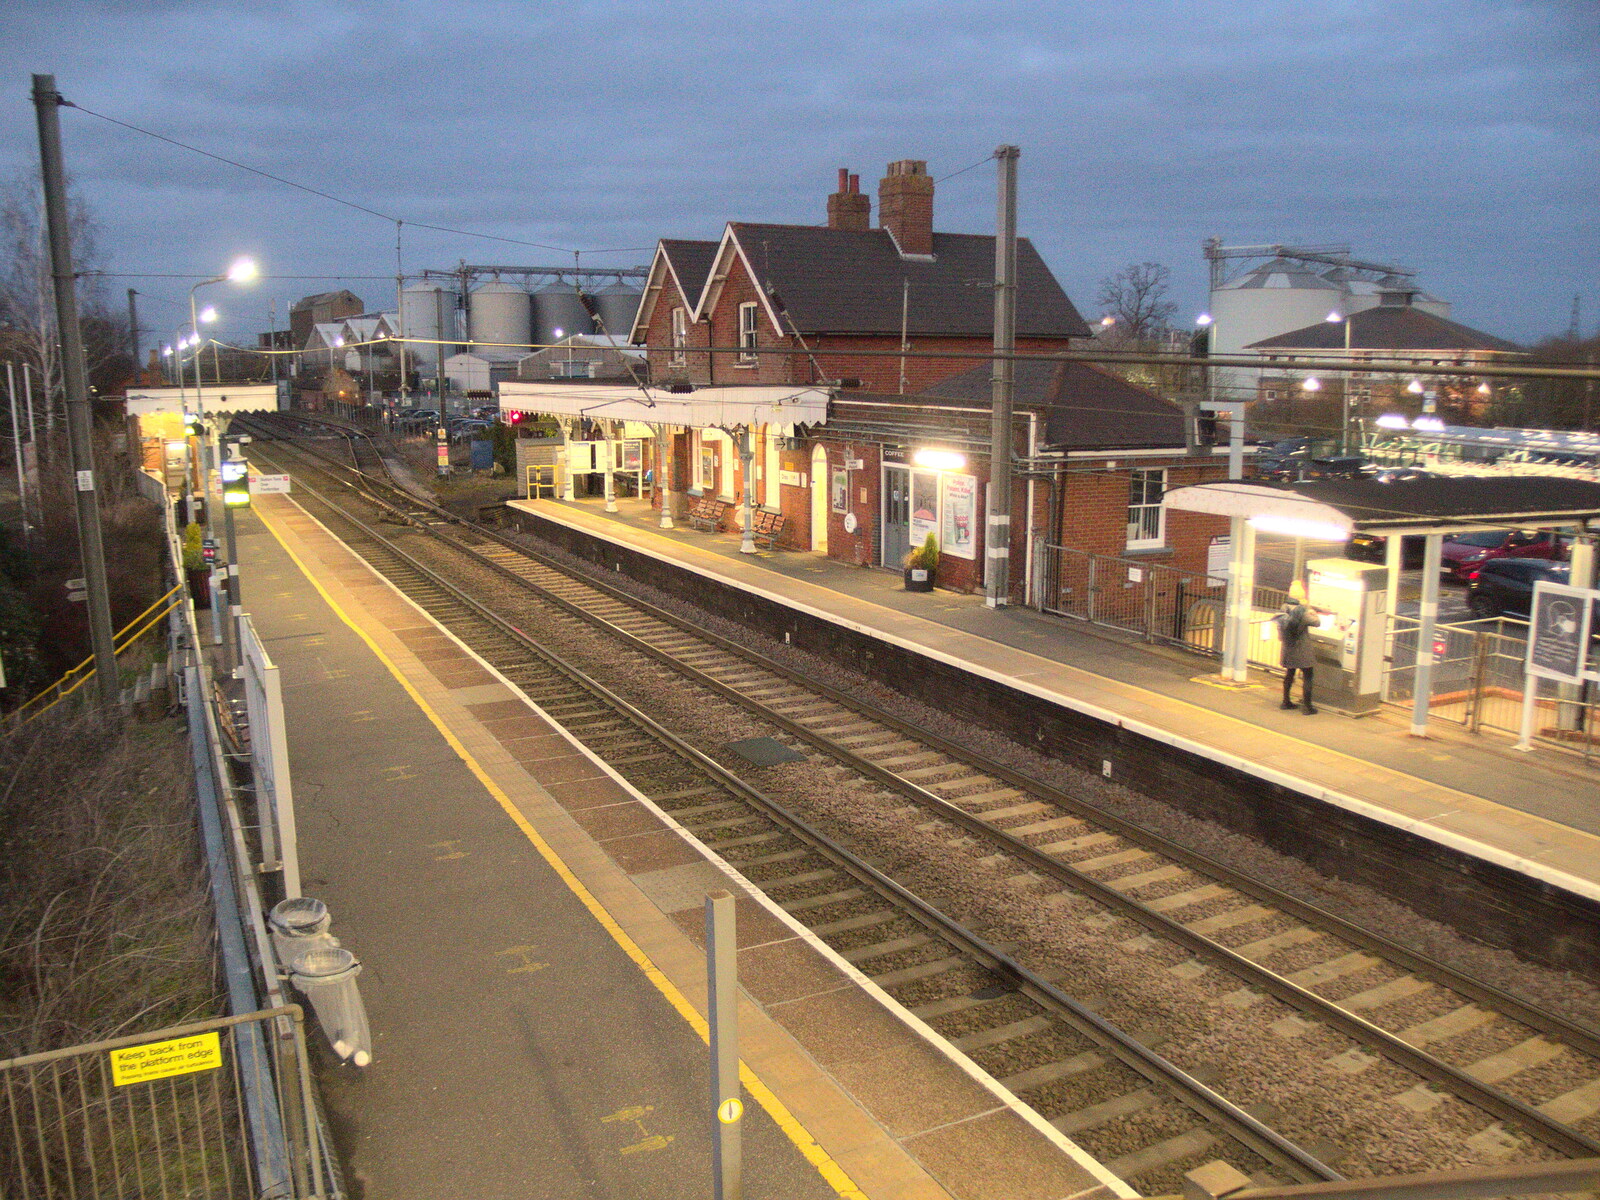 Diss station in the dusk from The Last Trip to the SwiftKey Office, Paddington, London - 23rd February 2022